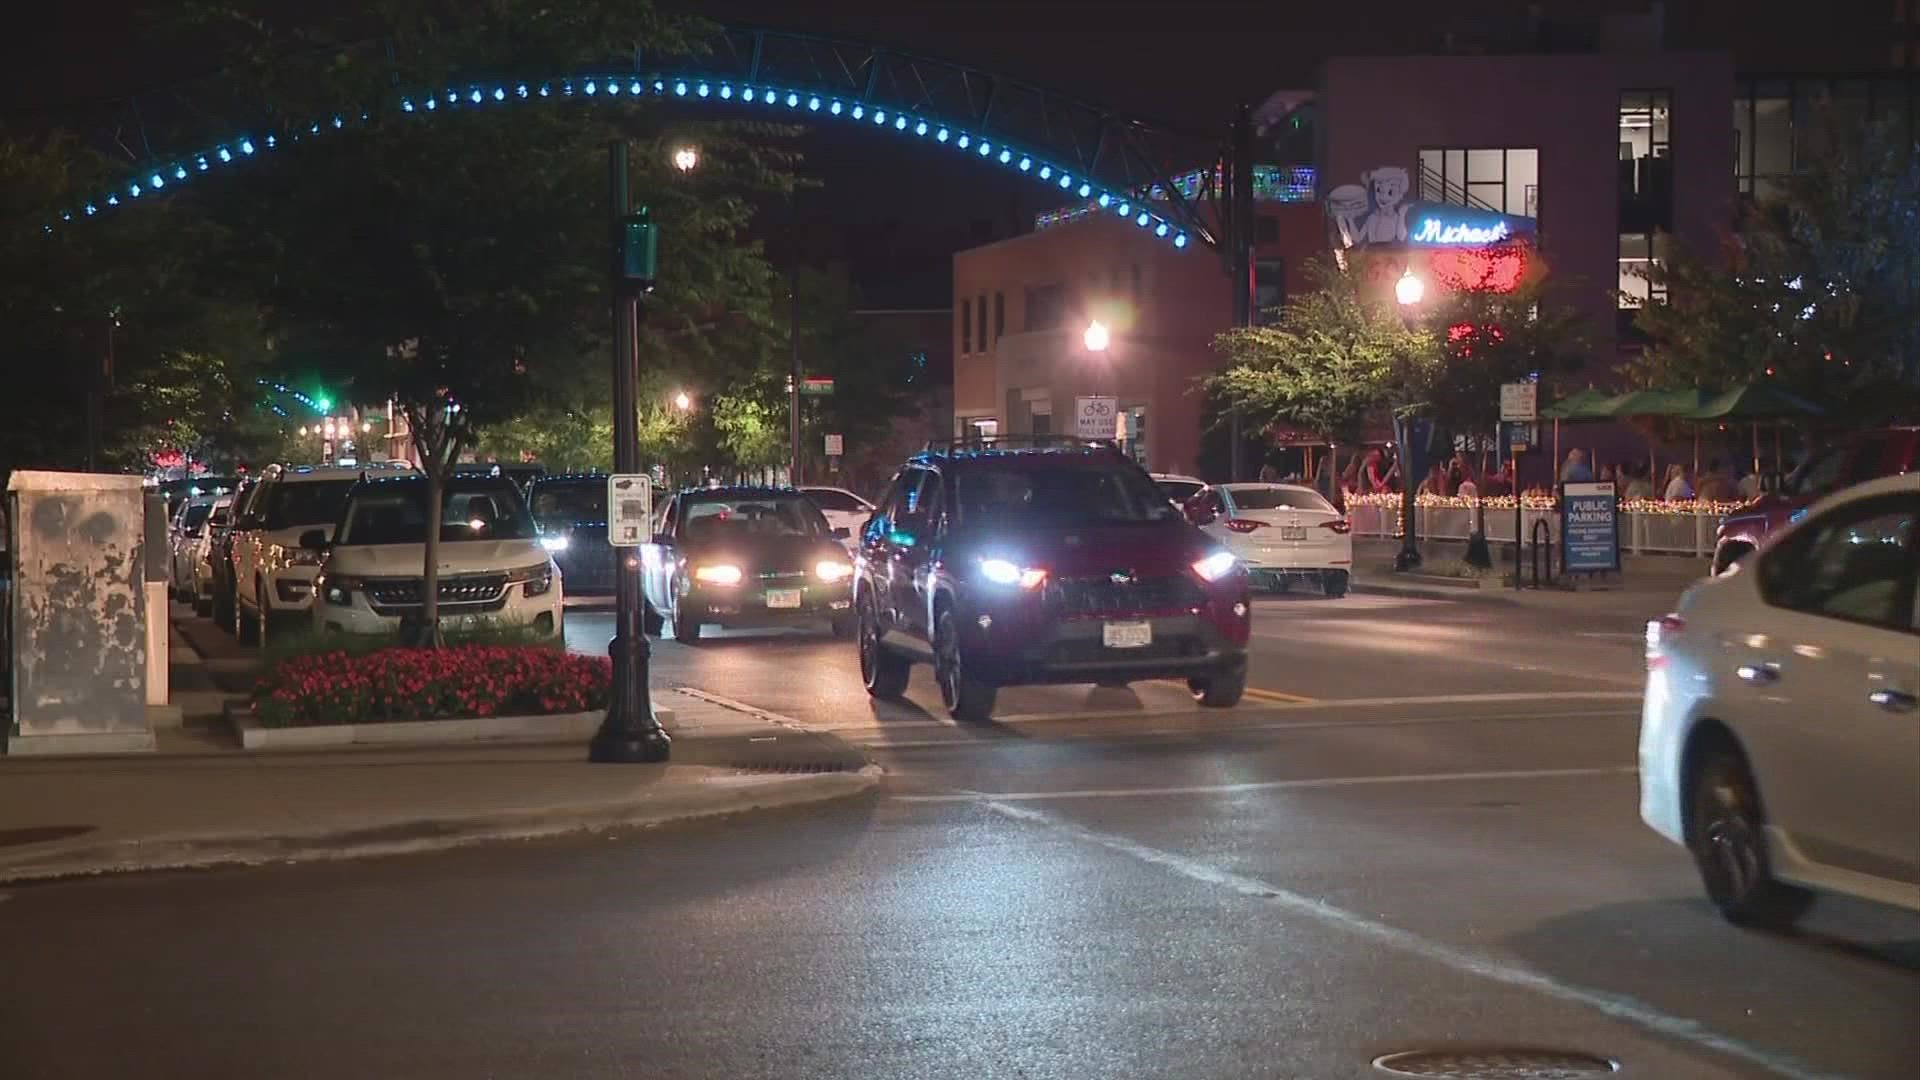 The City of Columbus is launching a pilot program to designate late-night drop-off and pickup zones for rideshare users visiting the Short North.